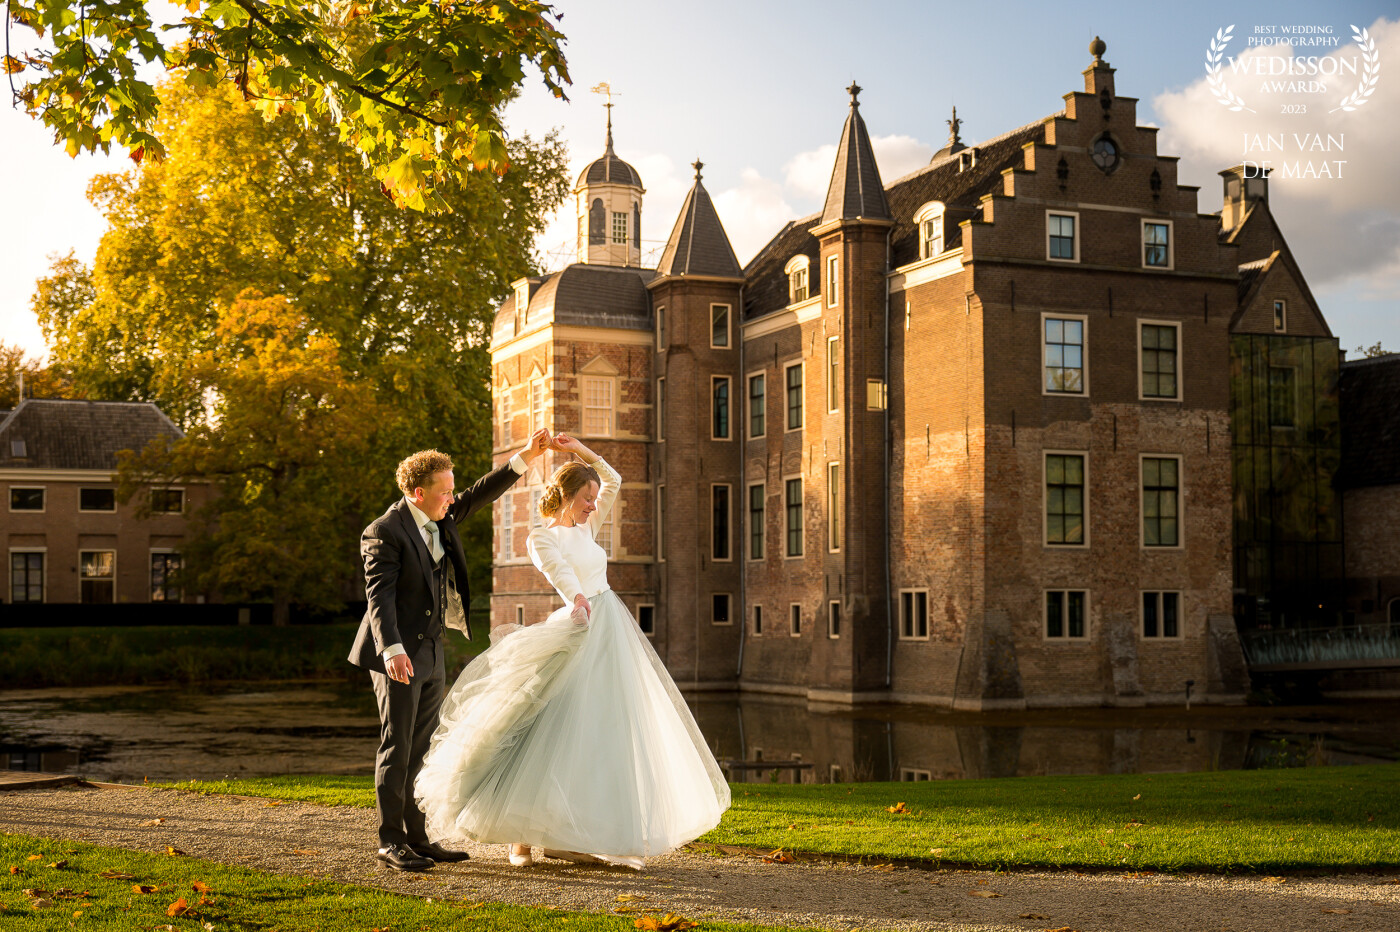 I love to make these type of images. Beautiful light and some old castle on the background. I let the couple make a small dance to add some action to the scene.